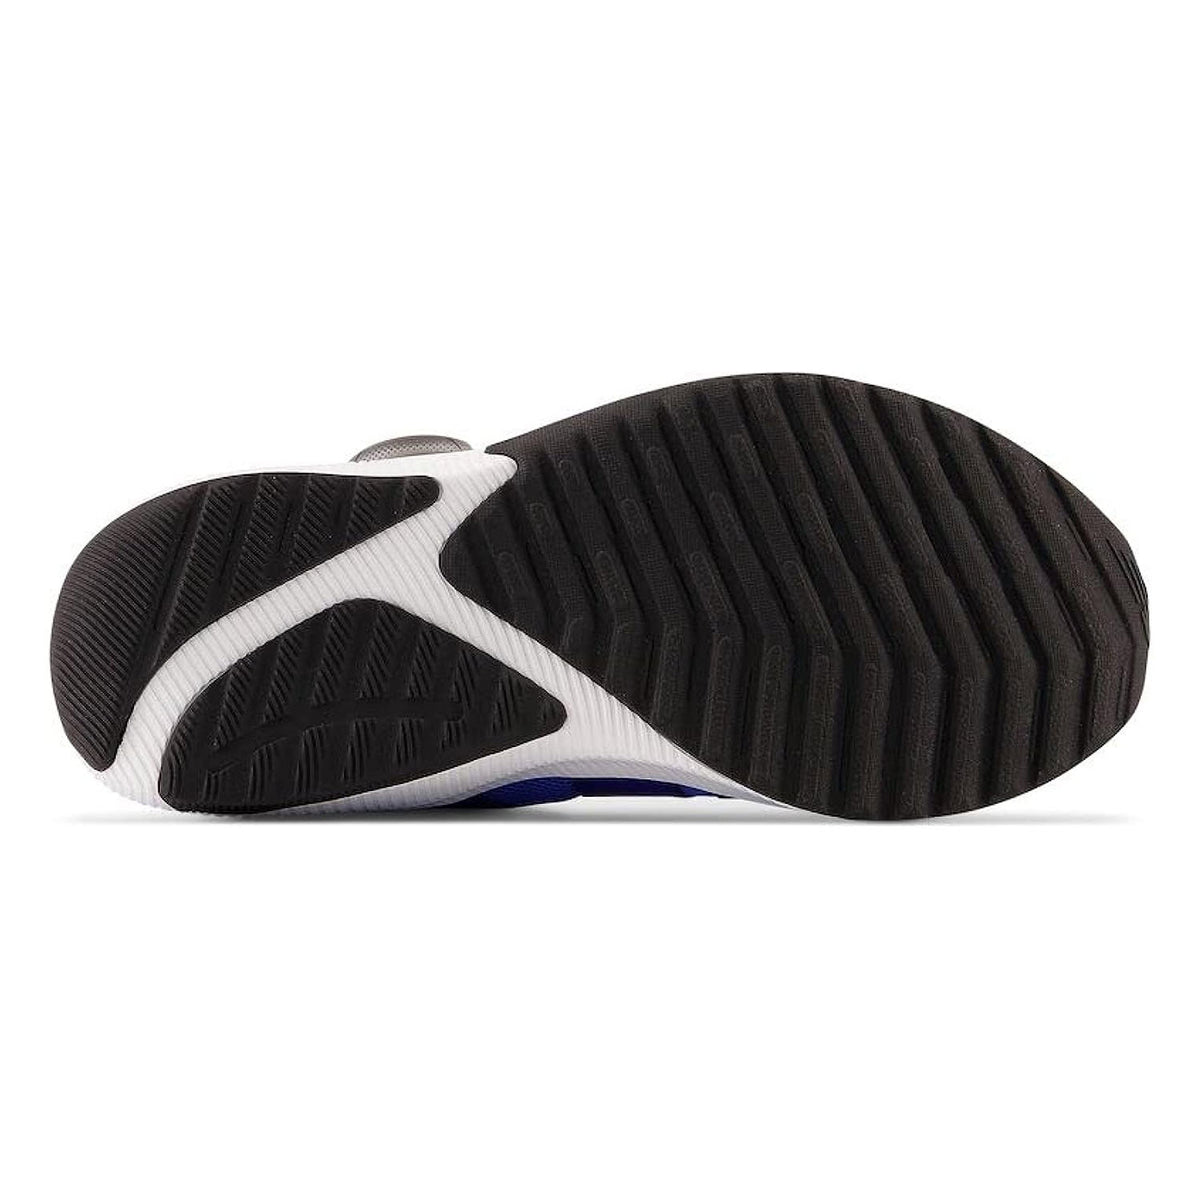 Bottom view of a kids&#39; New Balance running shoe featuring a patterned black and white rubber sole with a small blue accent and equipped with the BOA® Performance Fit System.